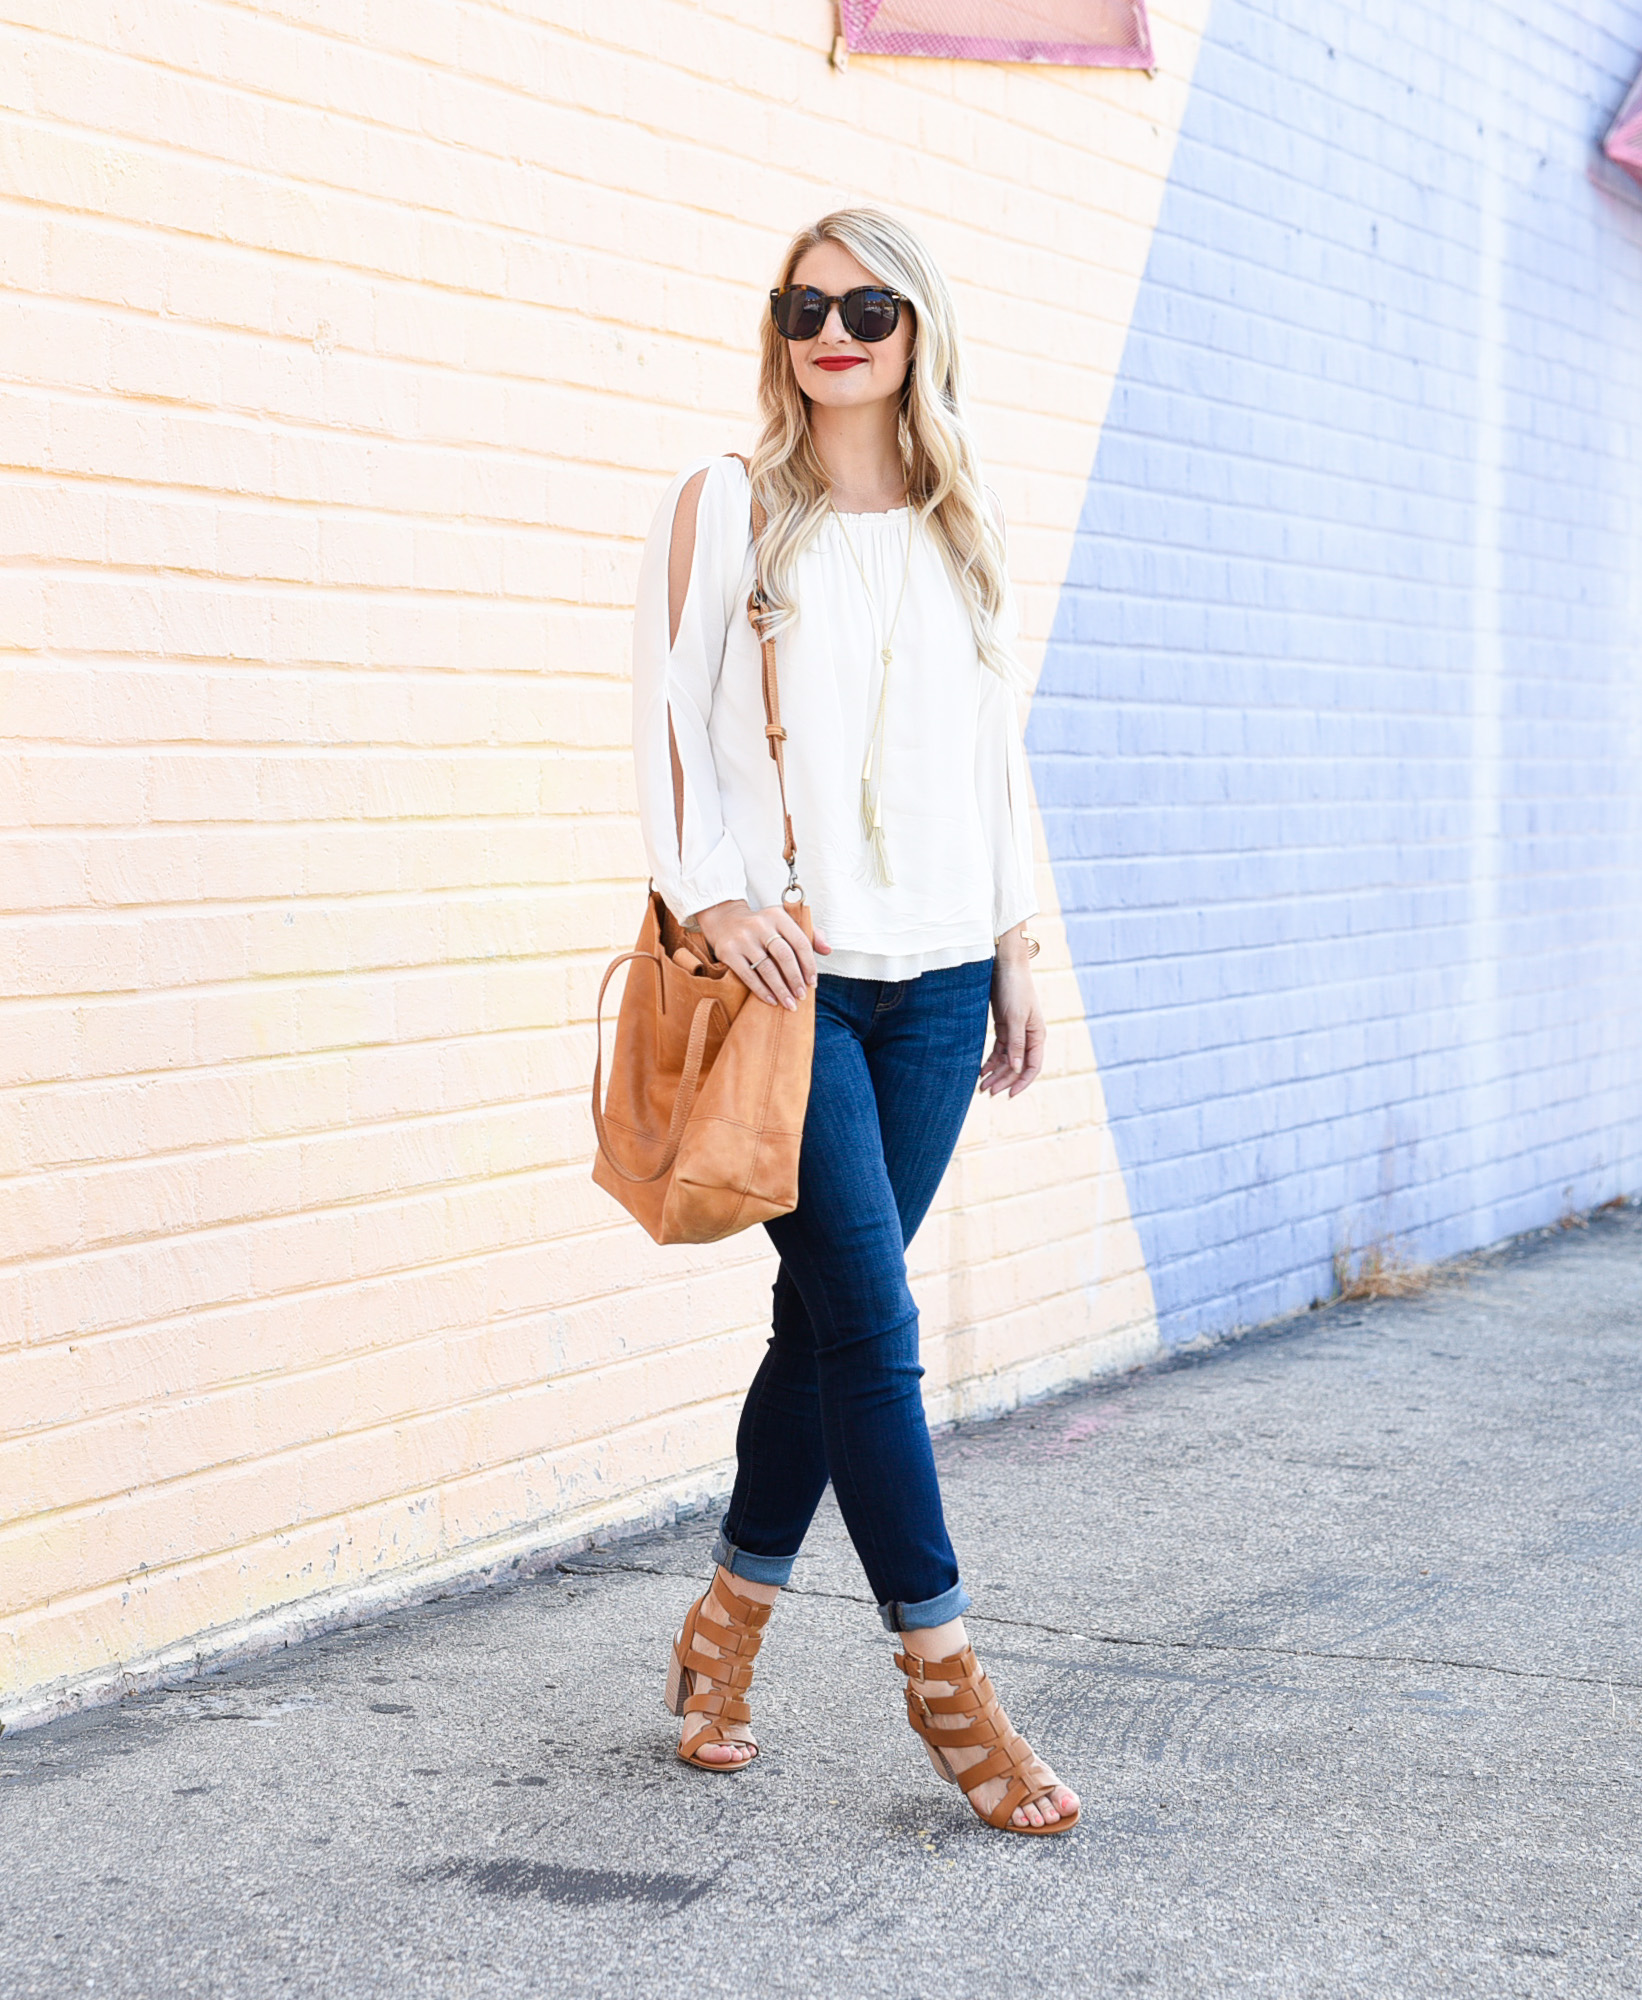 Love these basics! Nothing like a great pair of skinny jeans! 